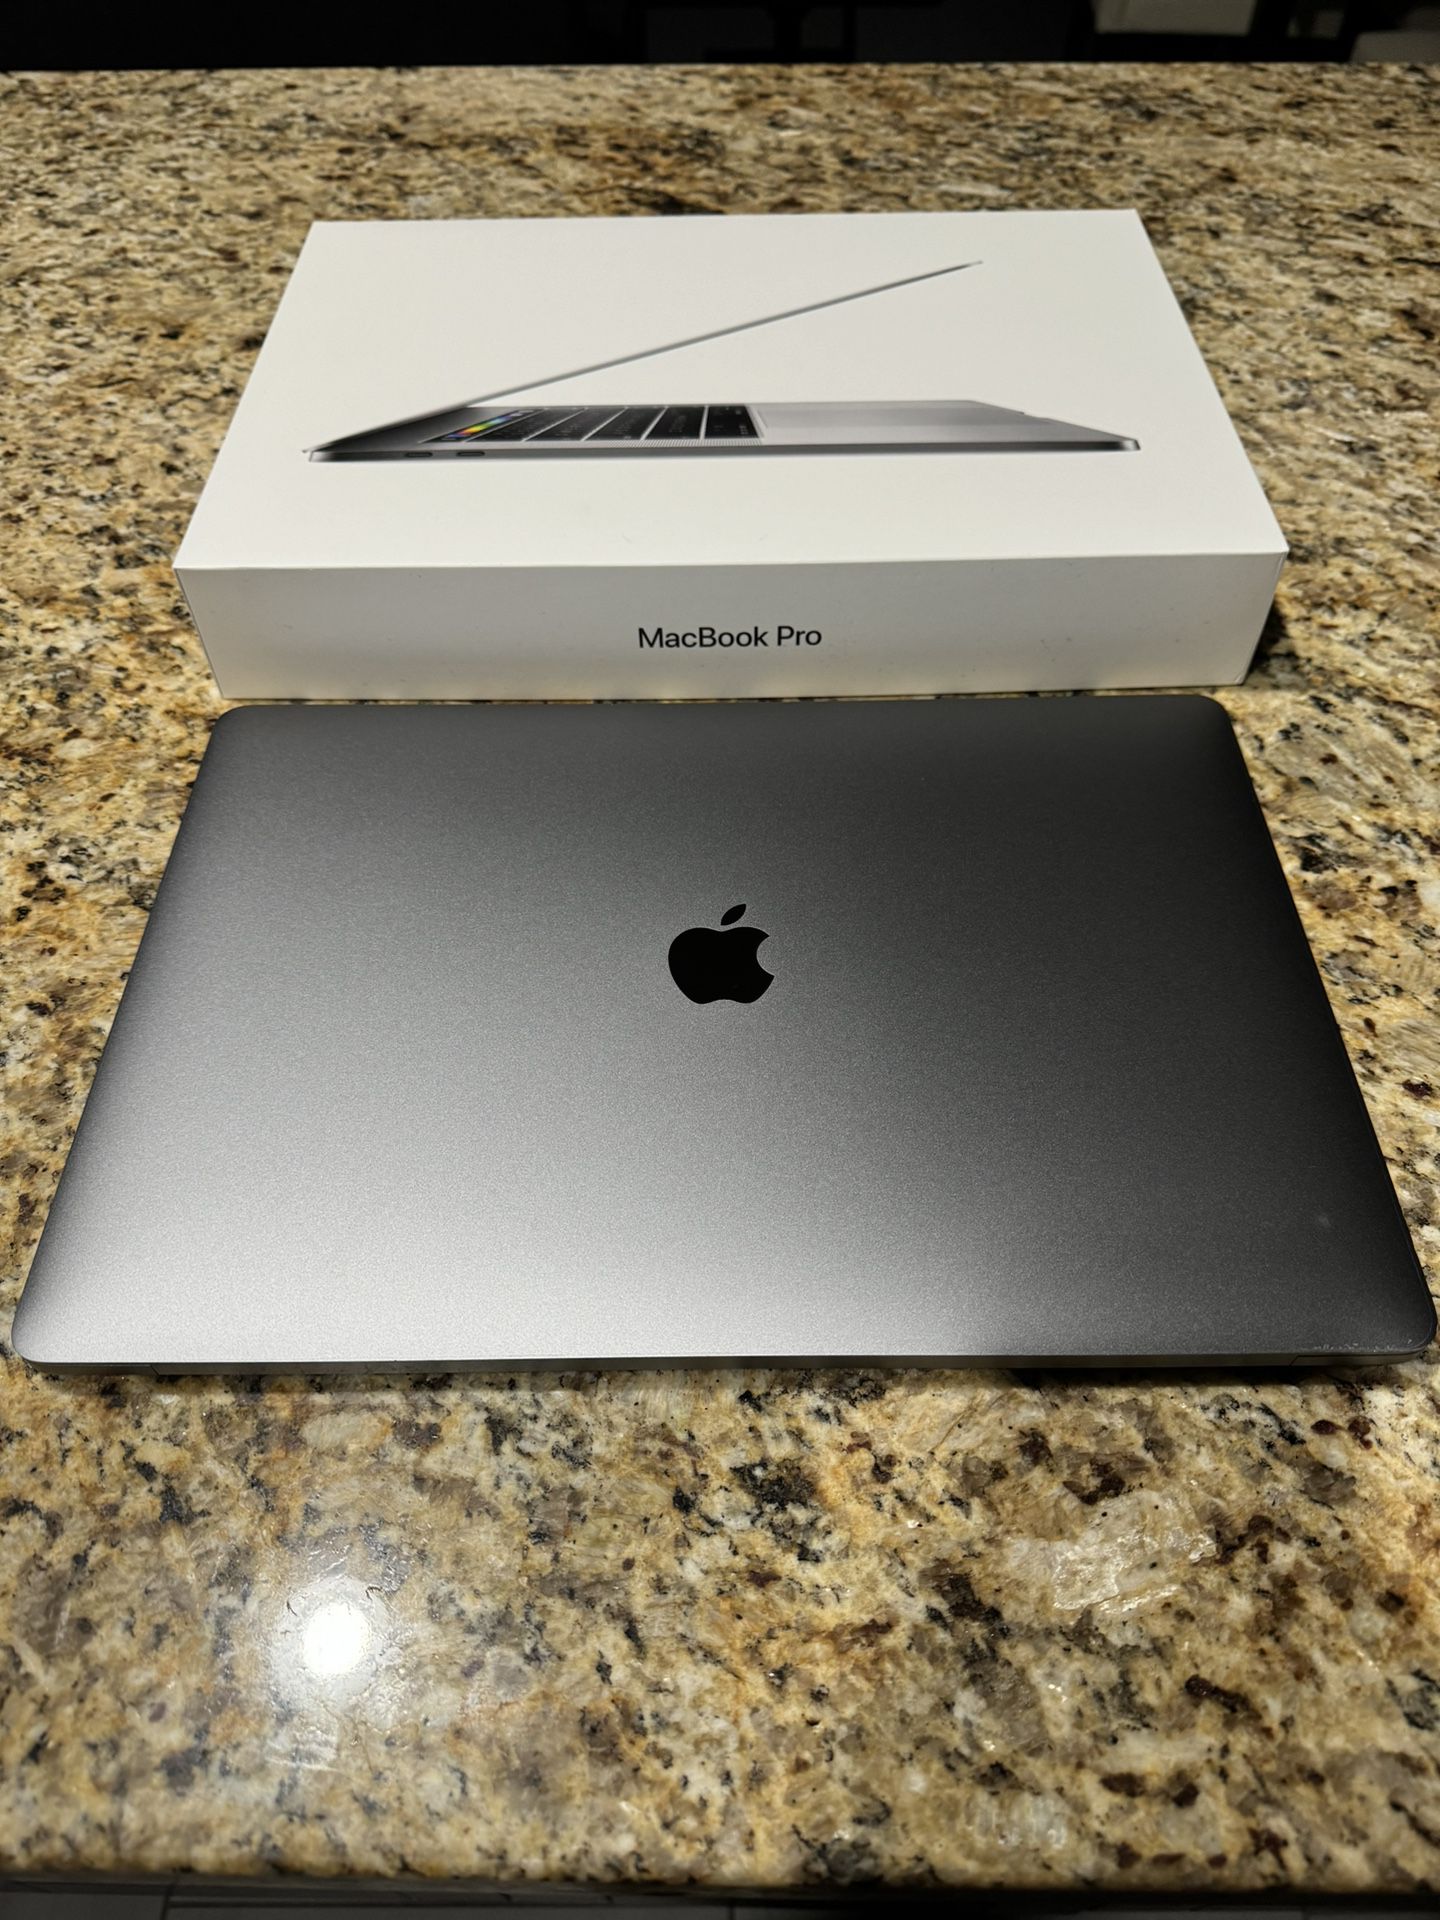 MBP 15.4/2.9GHz/16GB/Radeon Pro 460/2TB SSD 15.4in Retina Display, Touch Bar and Touch ID 